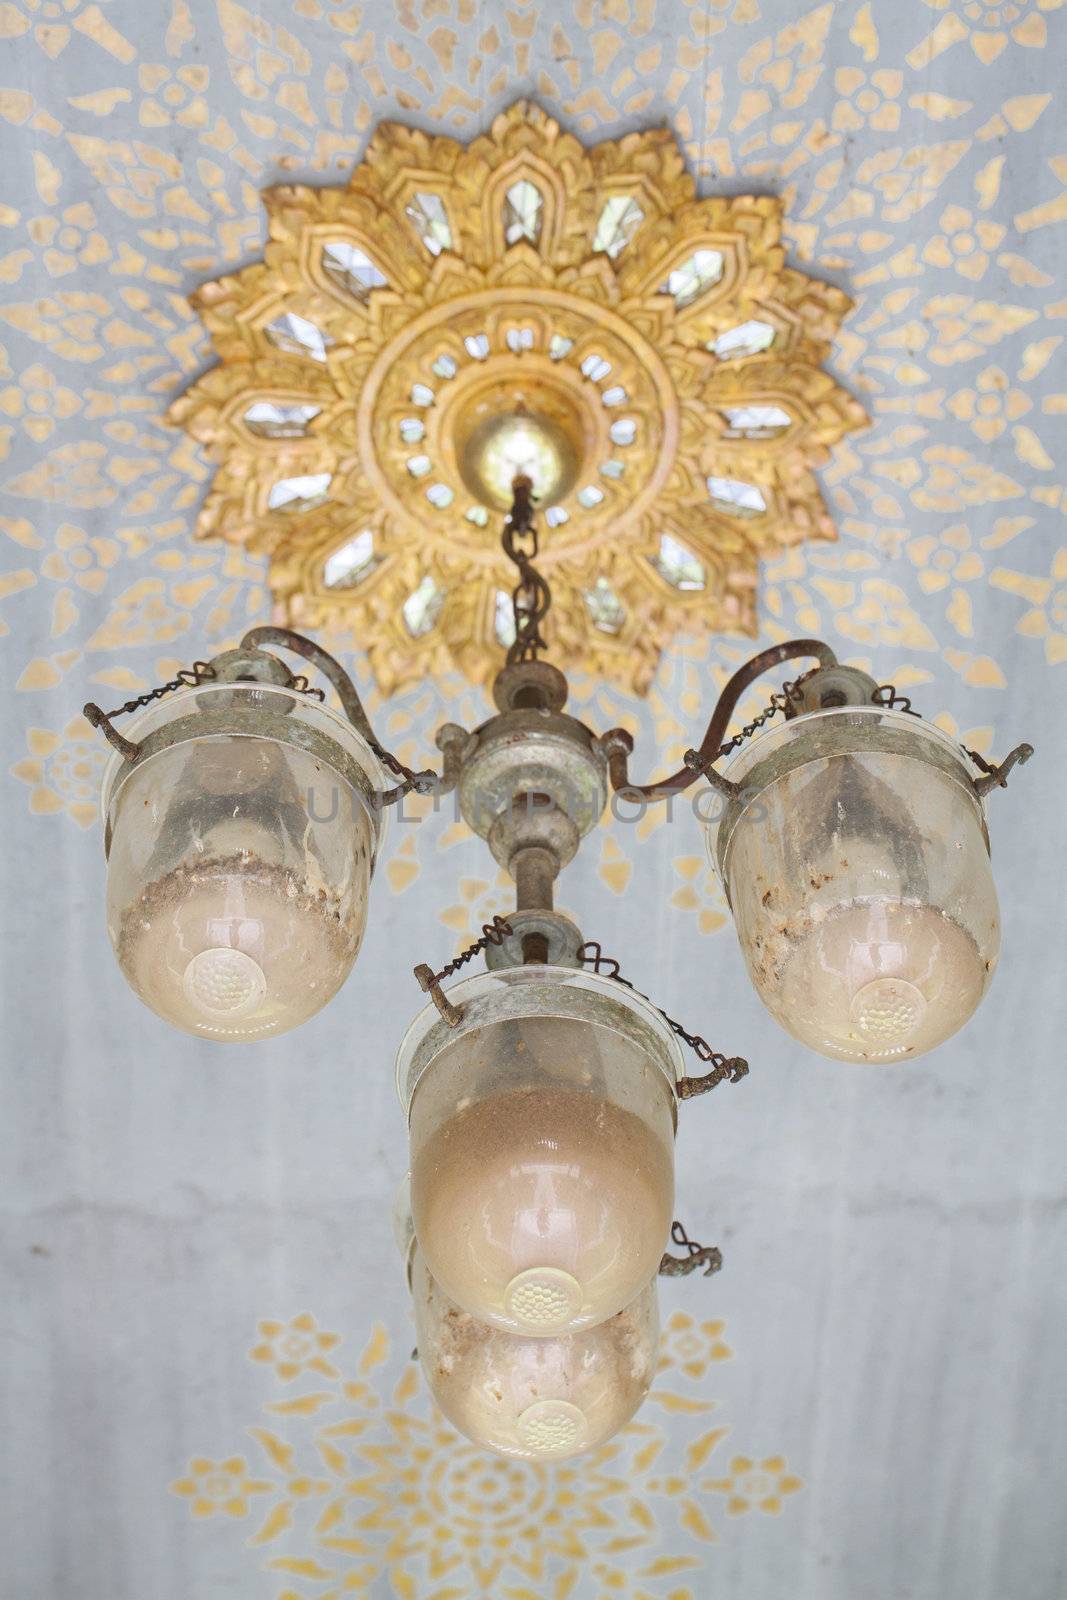 Antique lamp on the ceiling.